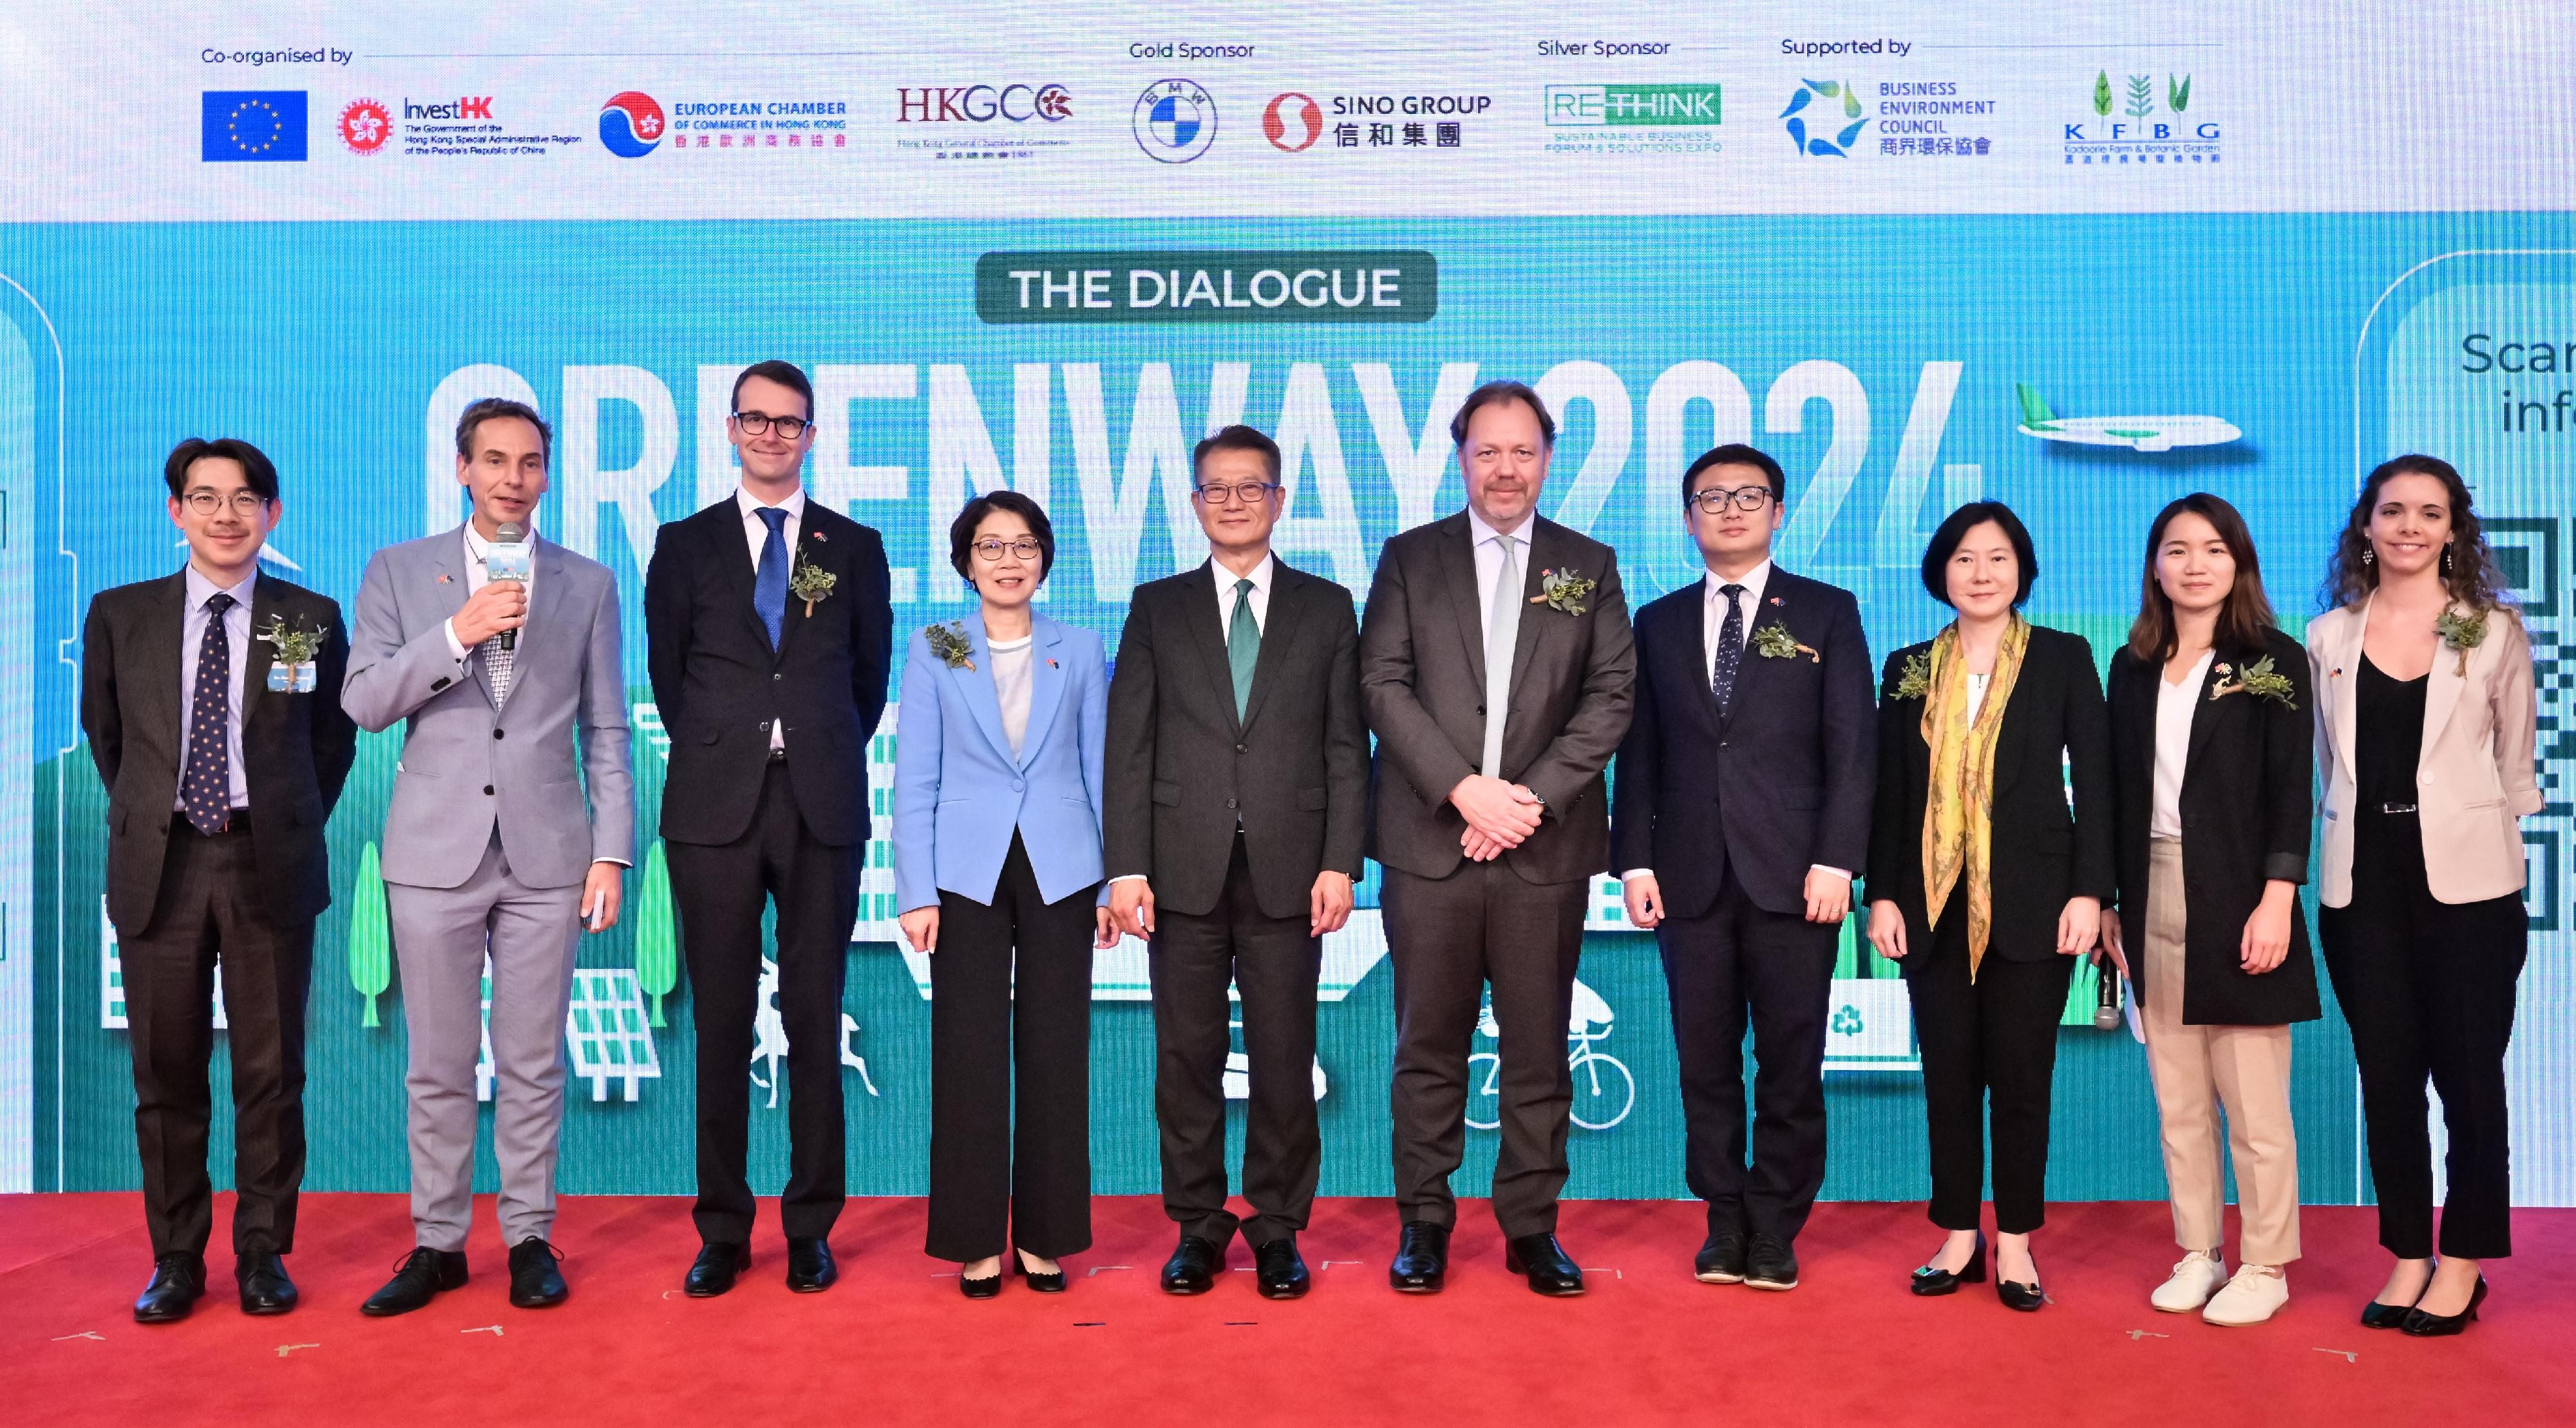 The Financial Secretary, Mr Paul Chan, attended the Greenway 2024 The Dialogue today (April 29). Photo shows (from third left) the Chair of the European Chamber of Commerce in Hong Kong, Mr Iñaki Amate; the Chairman of the Hong Kong General Chamber of Commerce, Mrs Betty Yuen; Mr Chan; the Head of the European Union Office to Hong Kong and Macao, Mr Thomas Gnocchi; Legislative Council Member Mr Gary Zhang; the Director-General of Investment Promotion of Invest Hong Kong, Ms Alpha Lau, and other guests at the event.